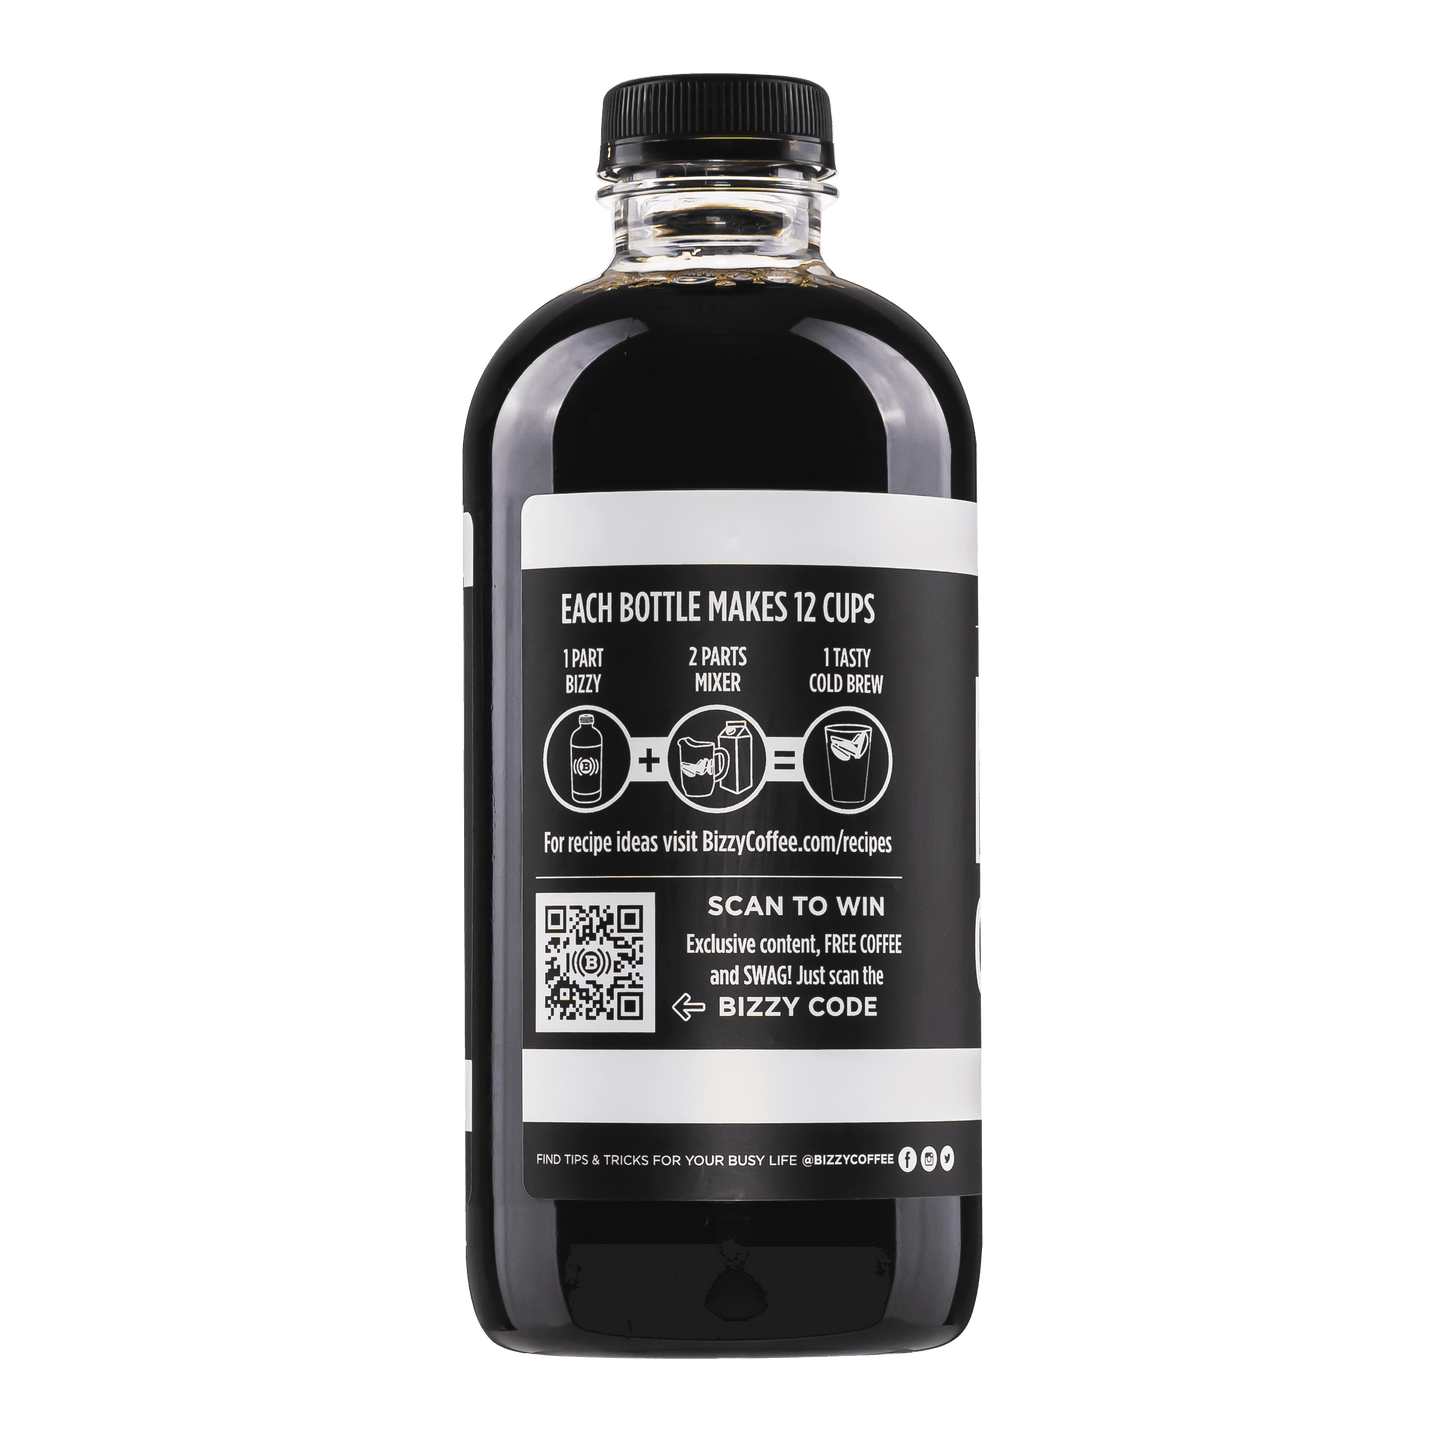 
                  
                    Bizzy-Organic-Cold-Brew-Coffee | Cold Brew Concentrate - 2 pack
                  
                